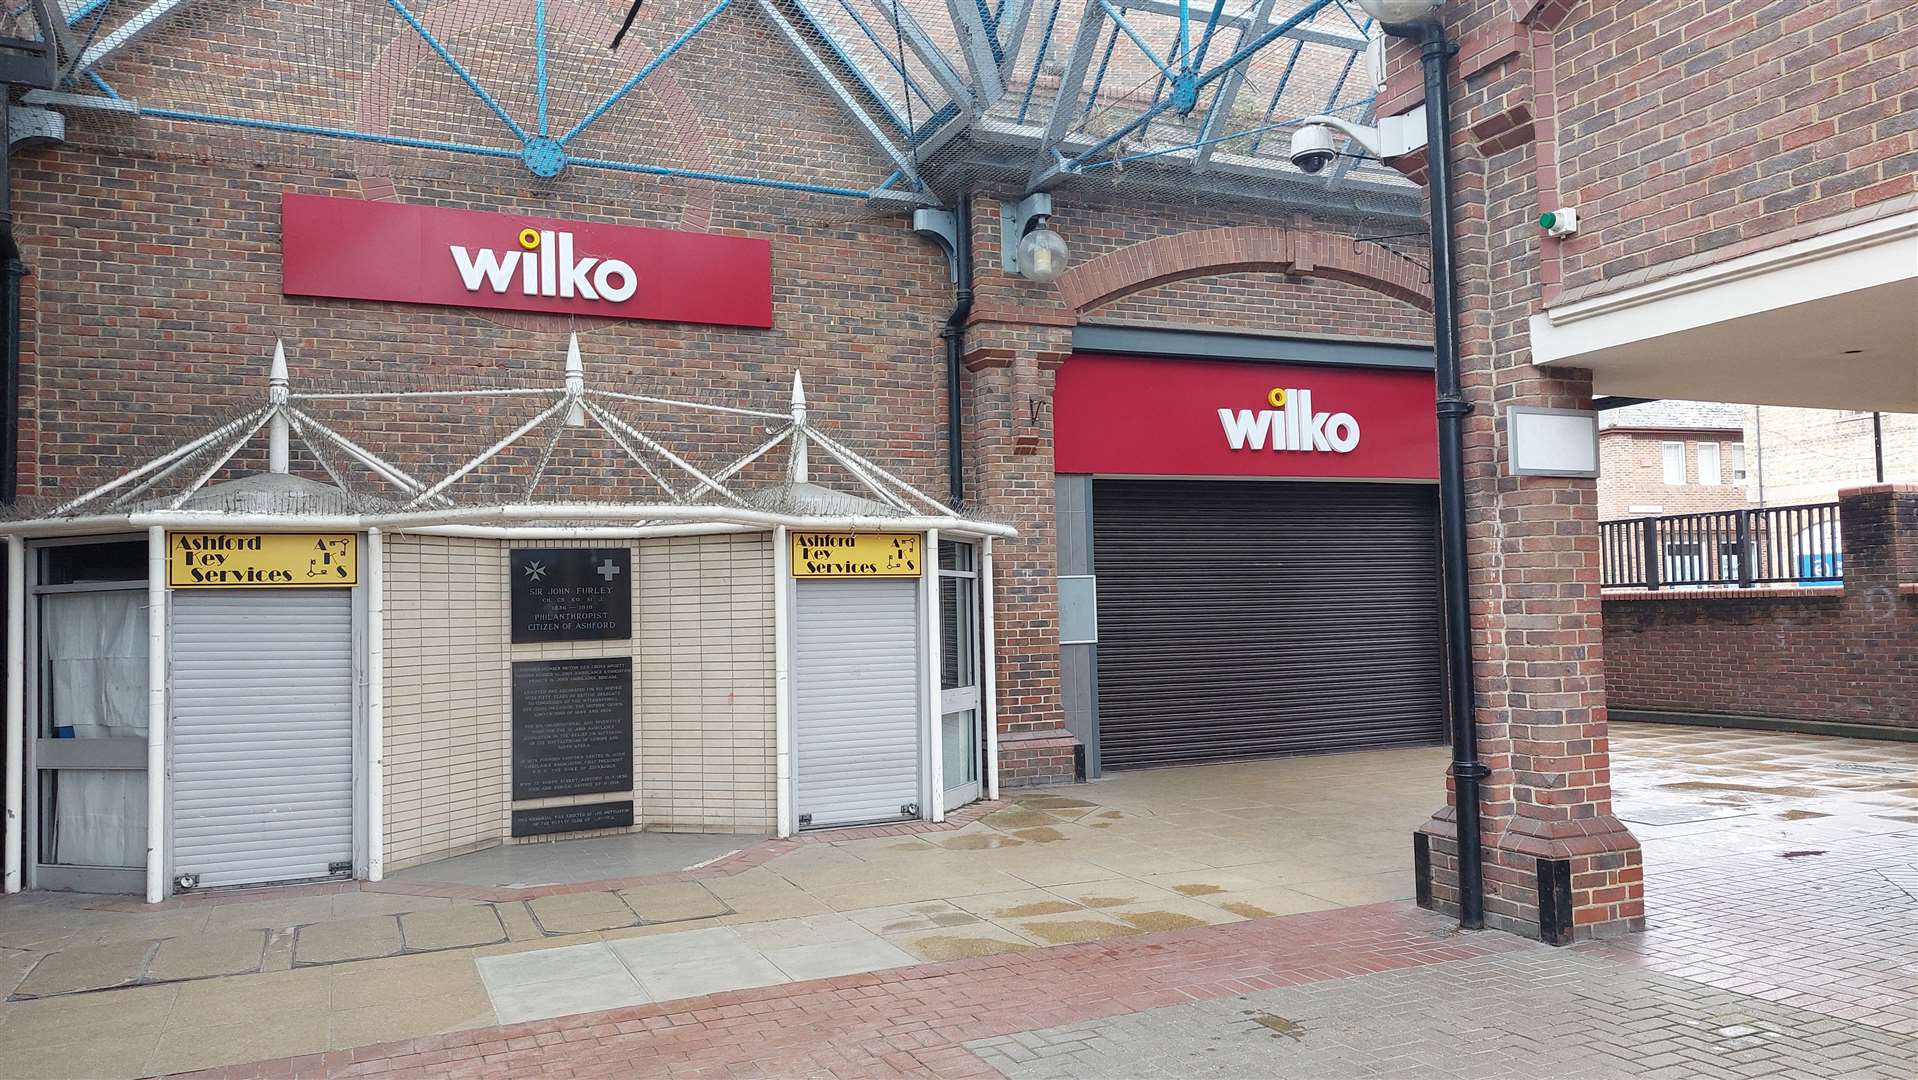 The shutters have now been pulled down on Wilko